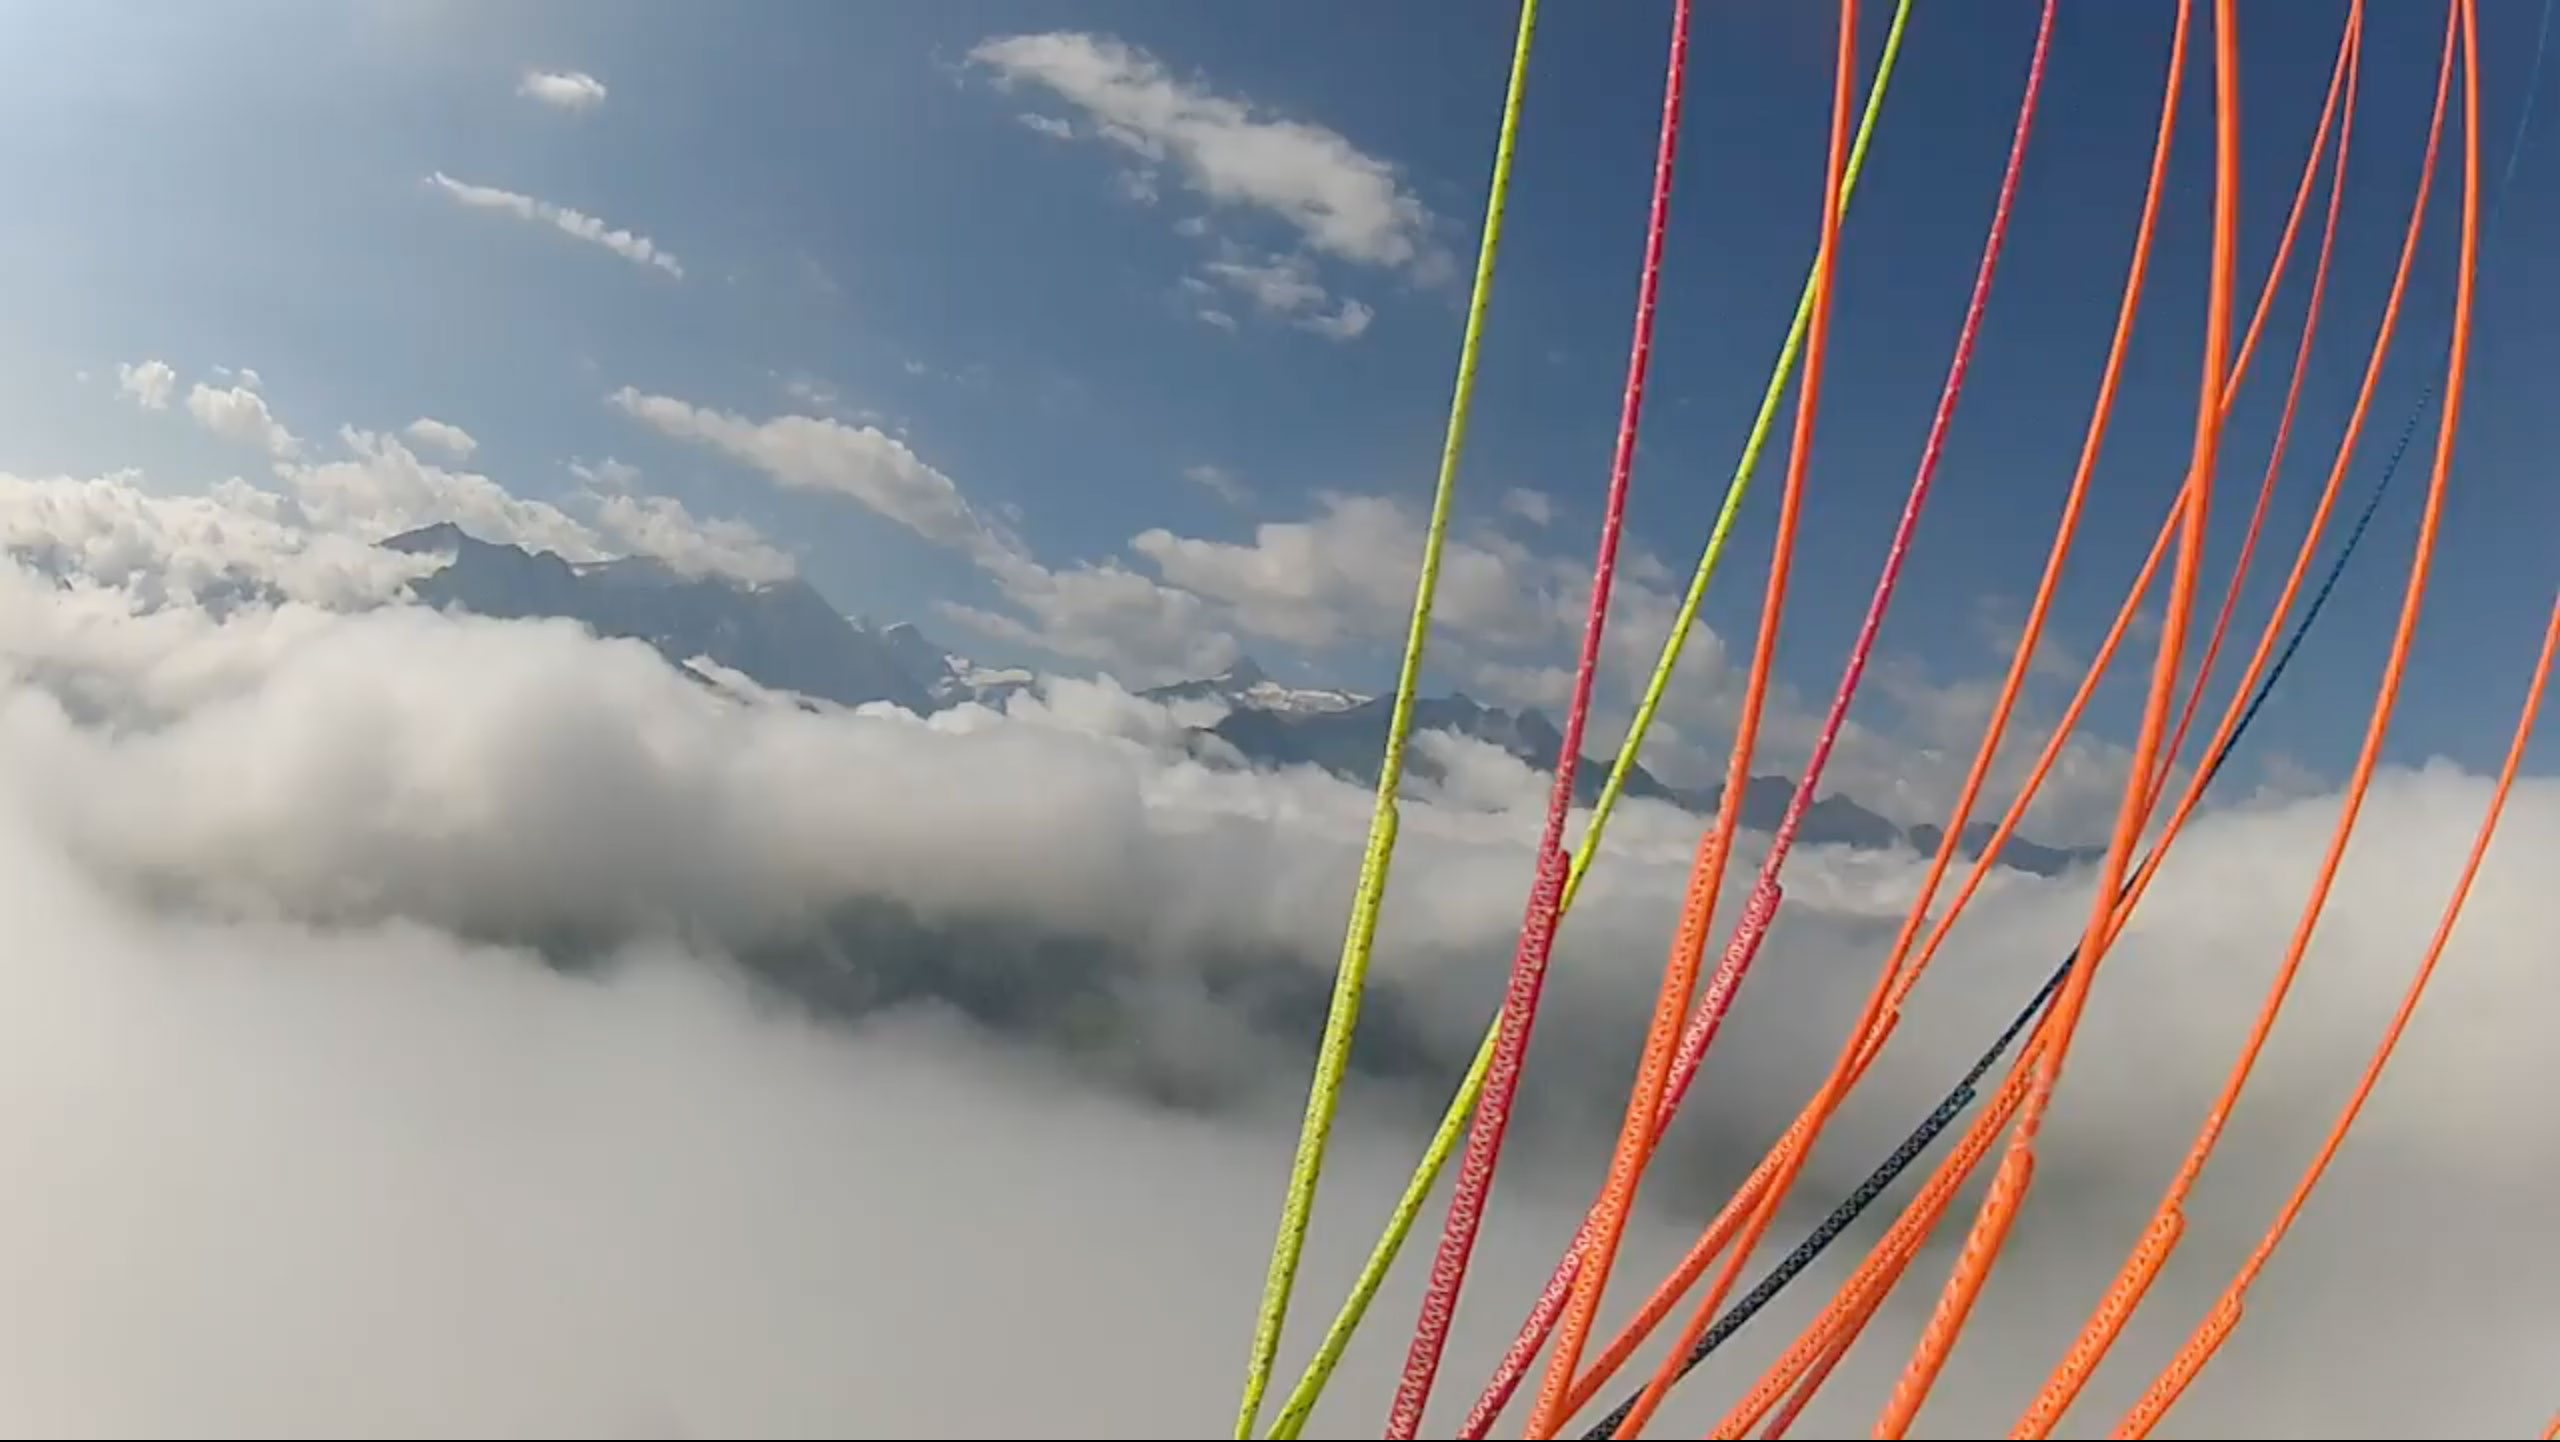 The thin lines of a Paraglider